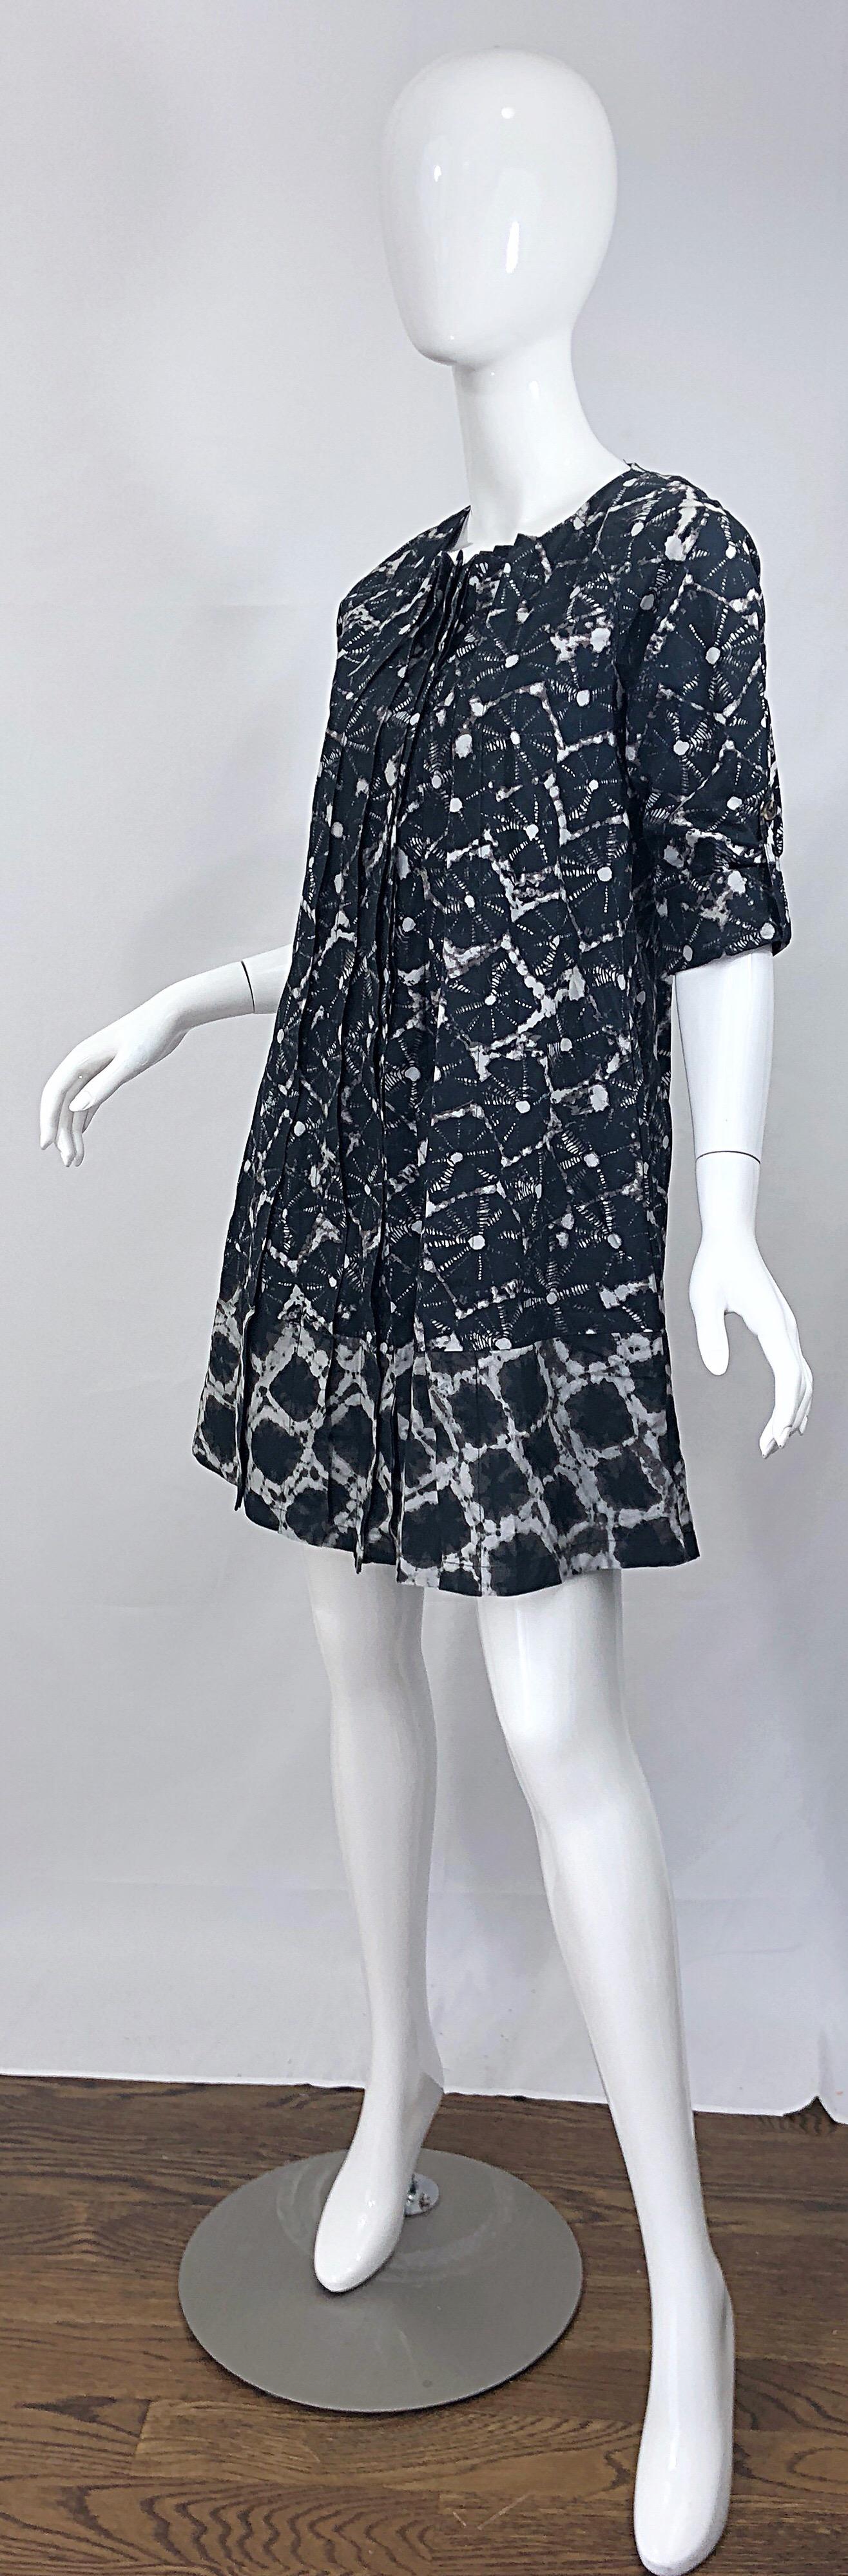 Thakoon Spring 2008 Black White Abstract Tie Dye Trapeze Swing Dress Jacket In Excellent Condition For Sale In San Diego, CA